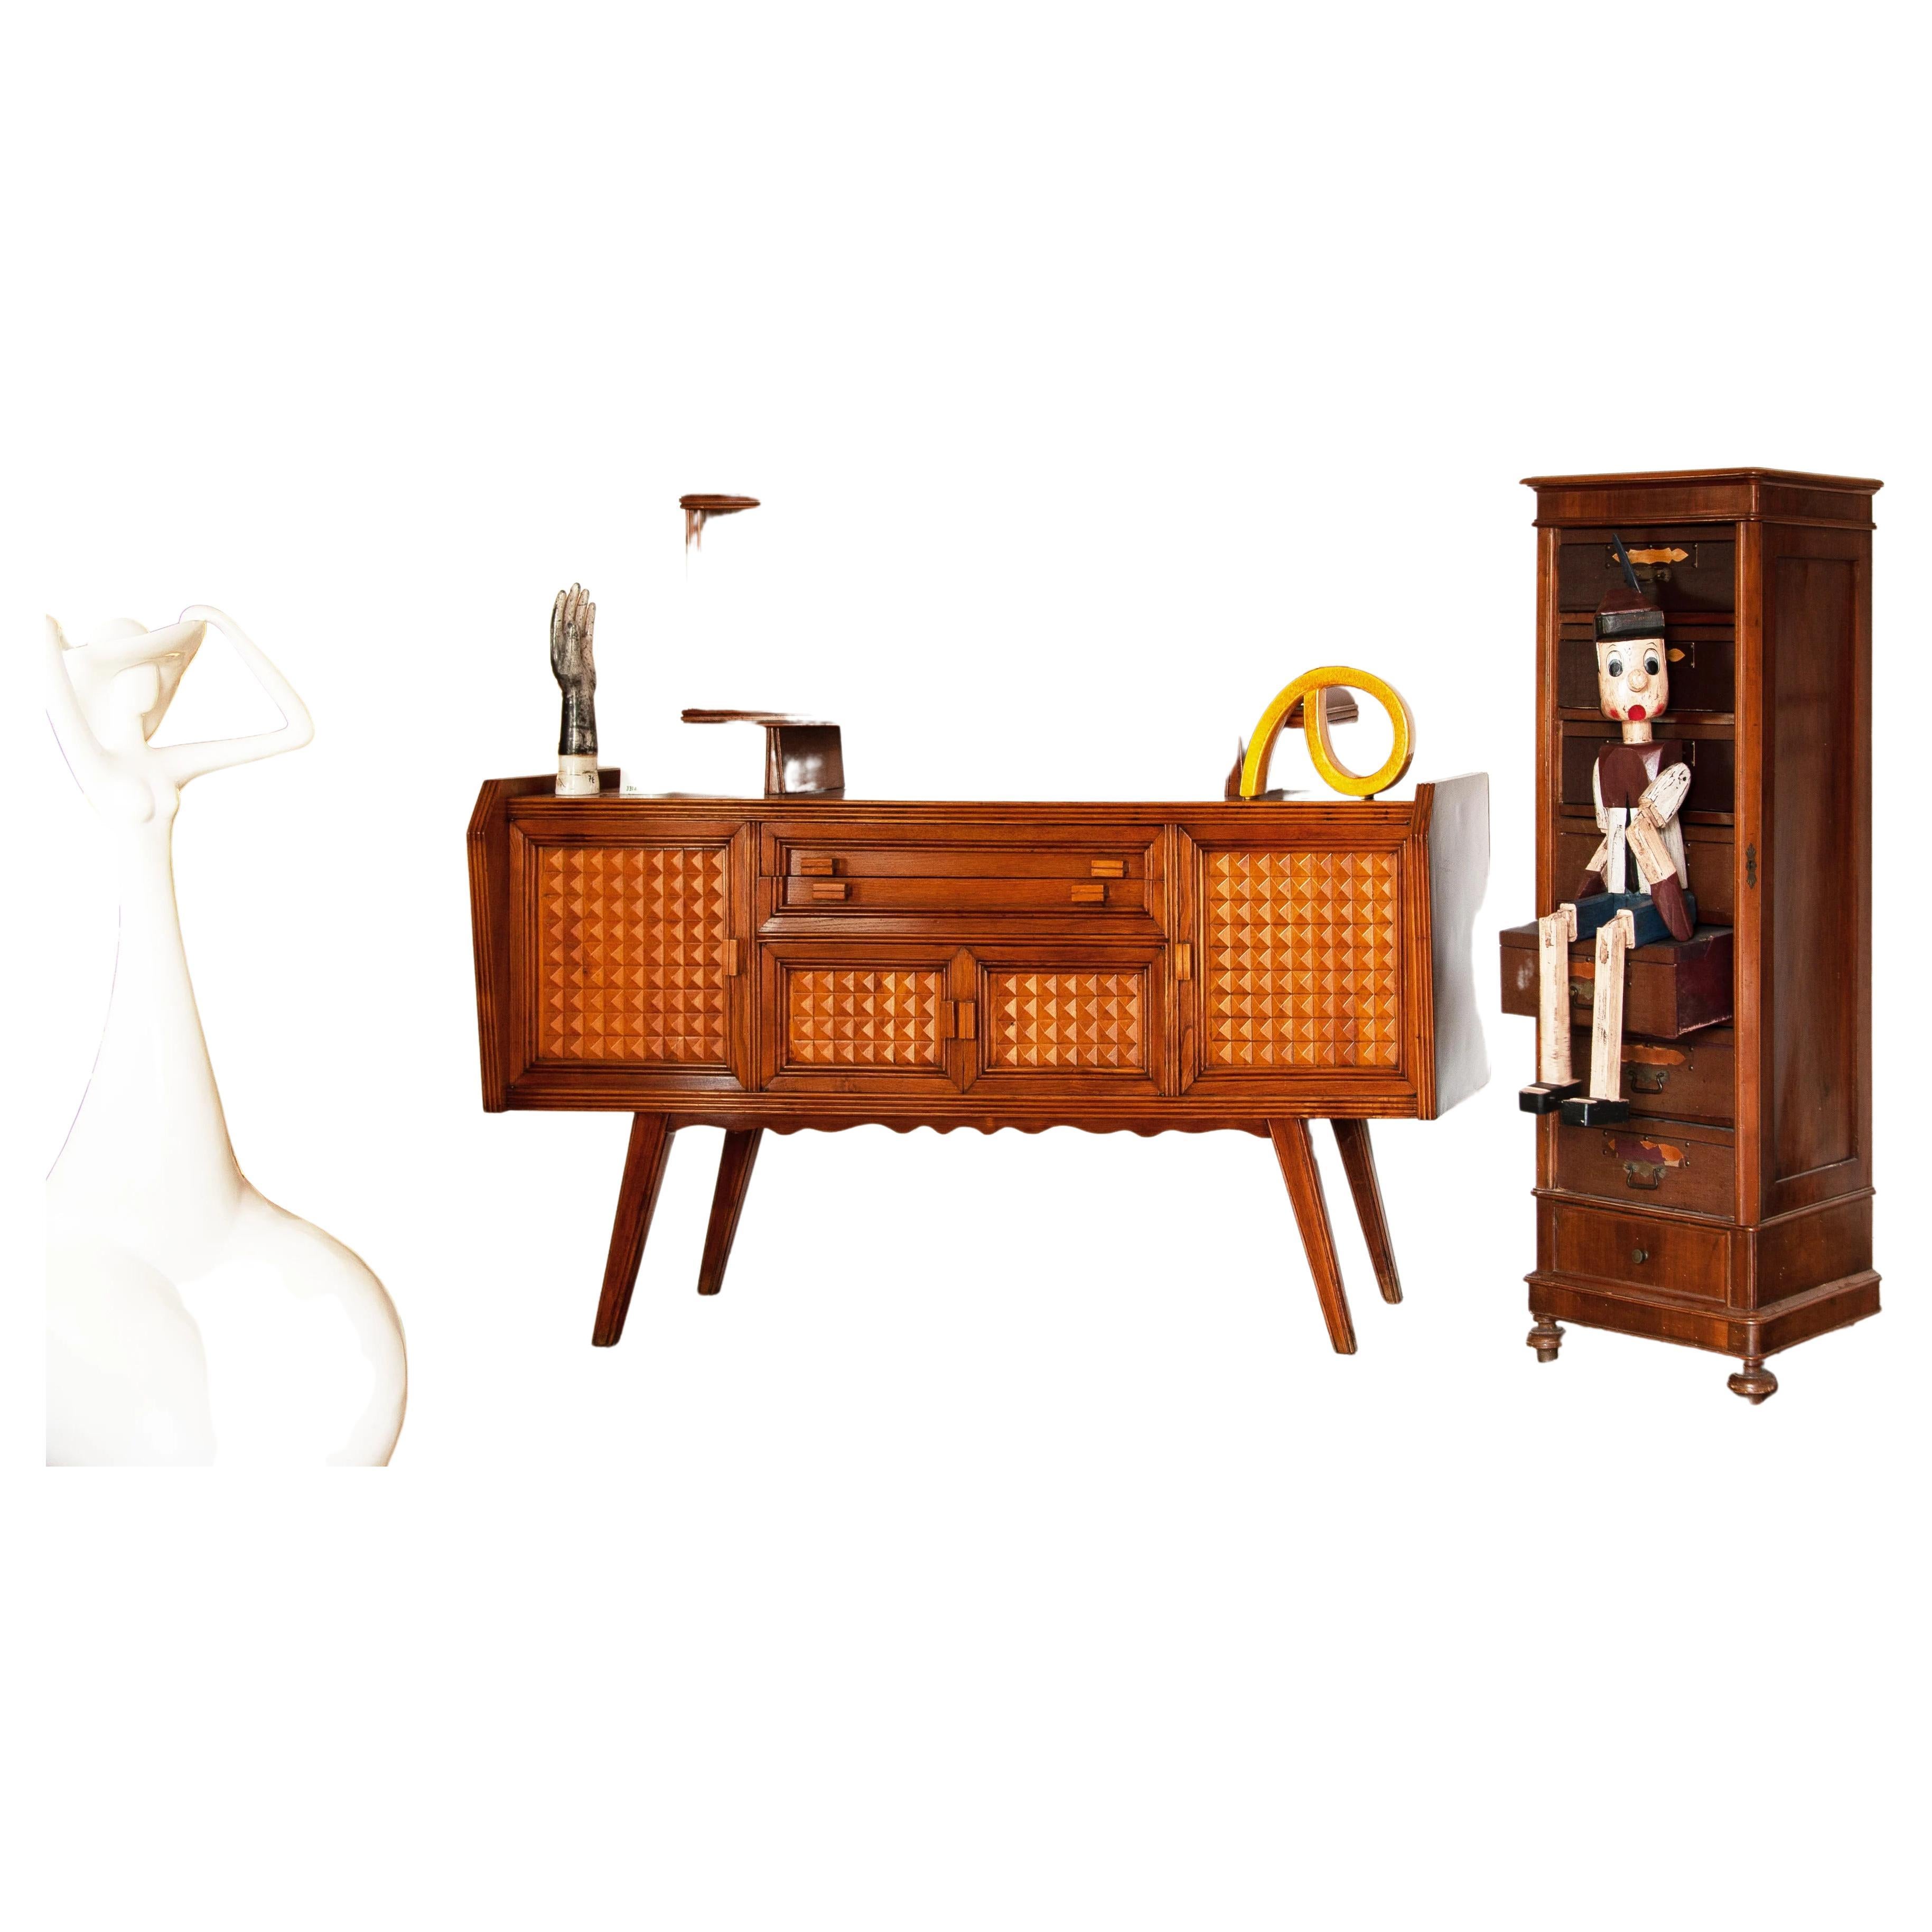 Paolo Buffa's wooden credenzas from the 1950s are exceptional examples of his talent as a designer and craftsman in the field of furniture and interior design. During this period, Paolo Buffa created several furniture masterpieces that embodied a